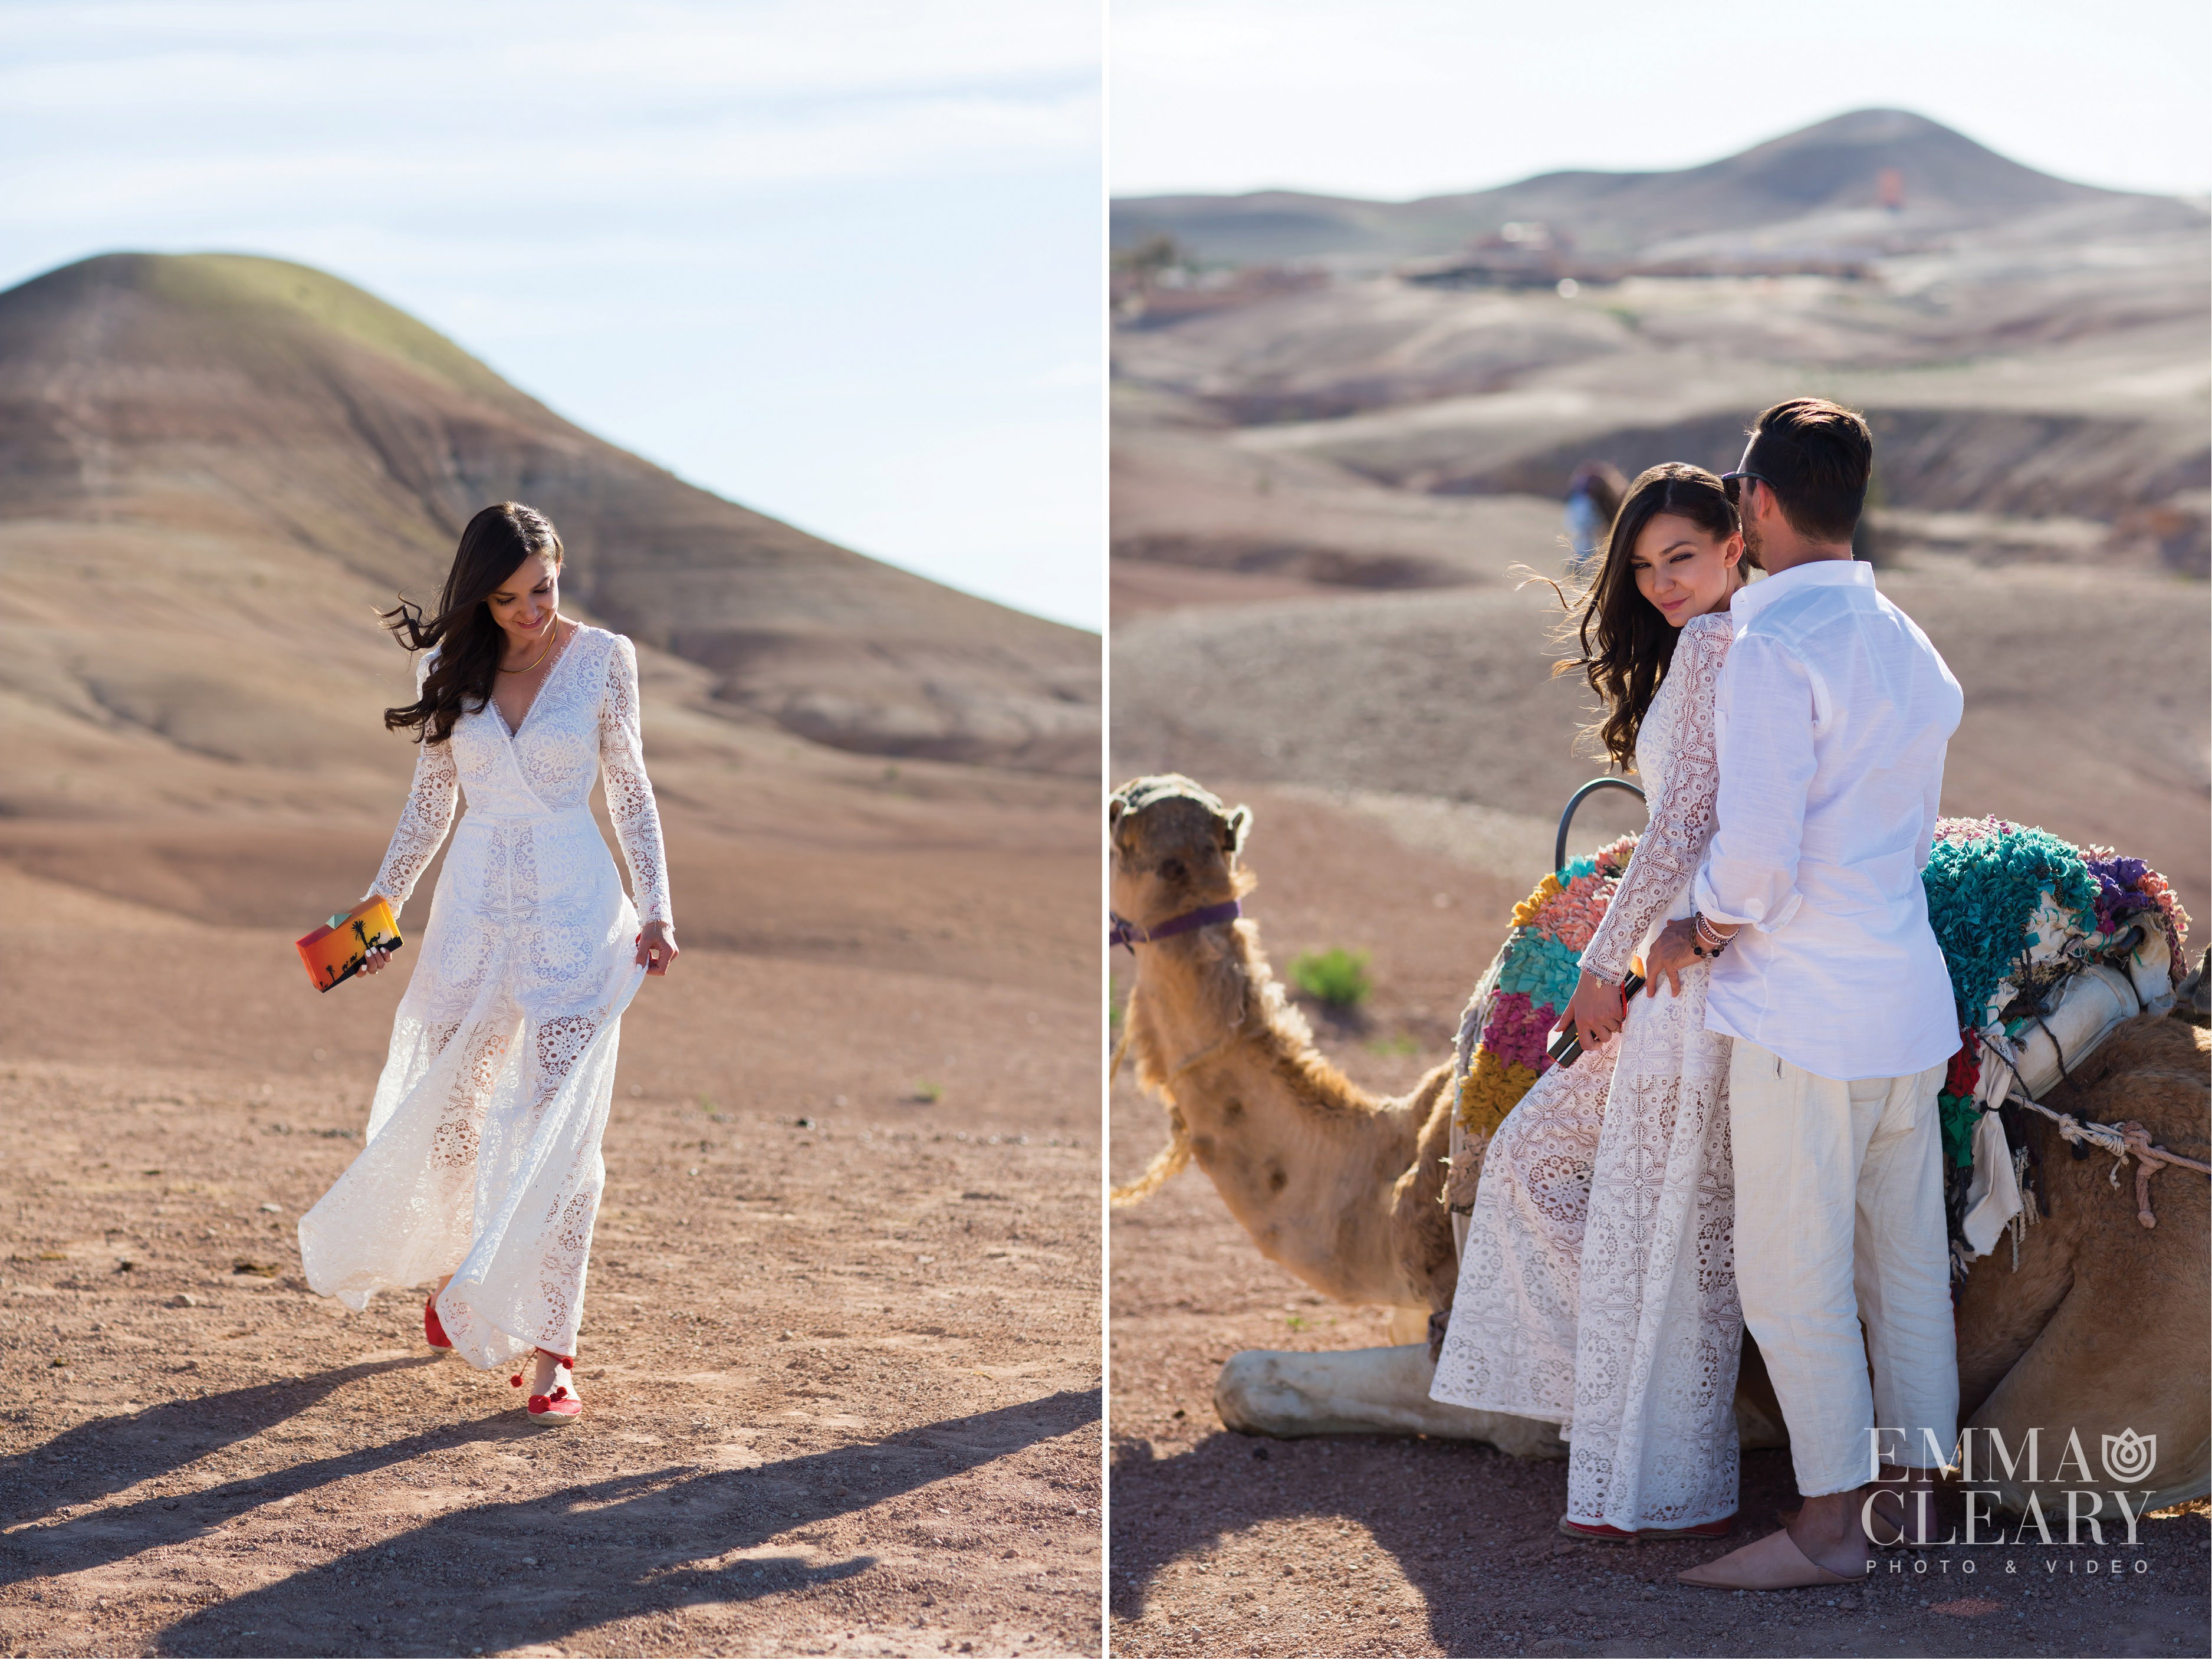 Emma_cleary_photography Destination Wedding Morrocco02